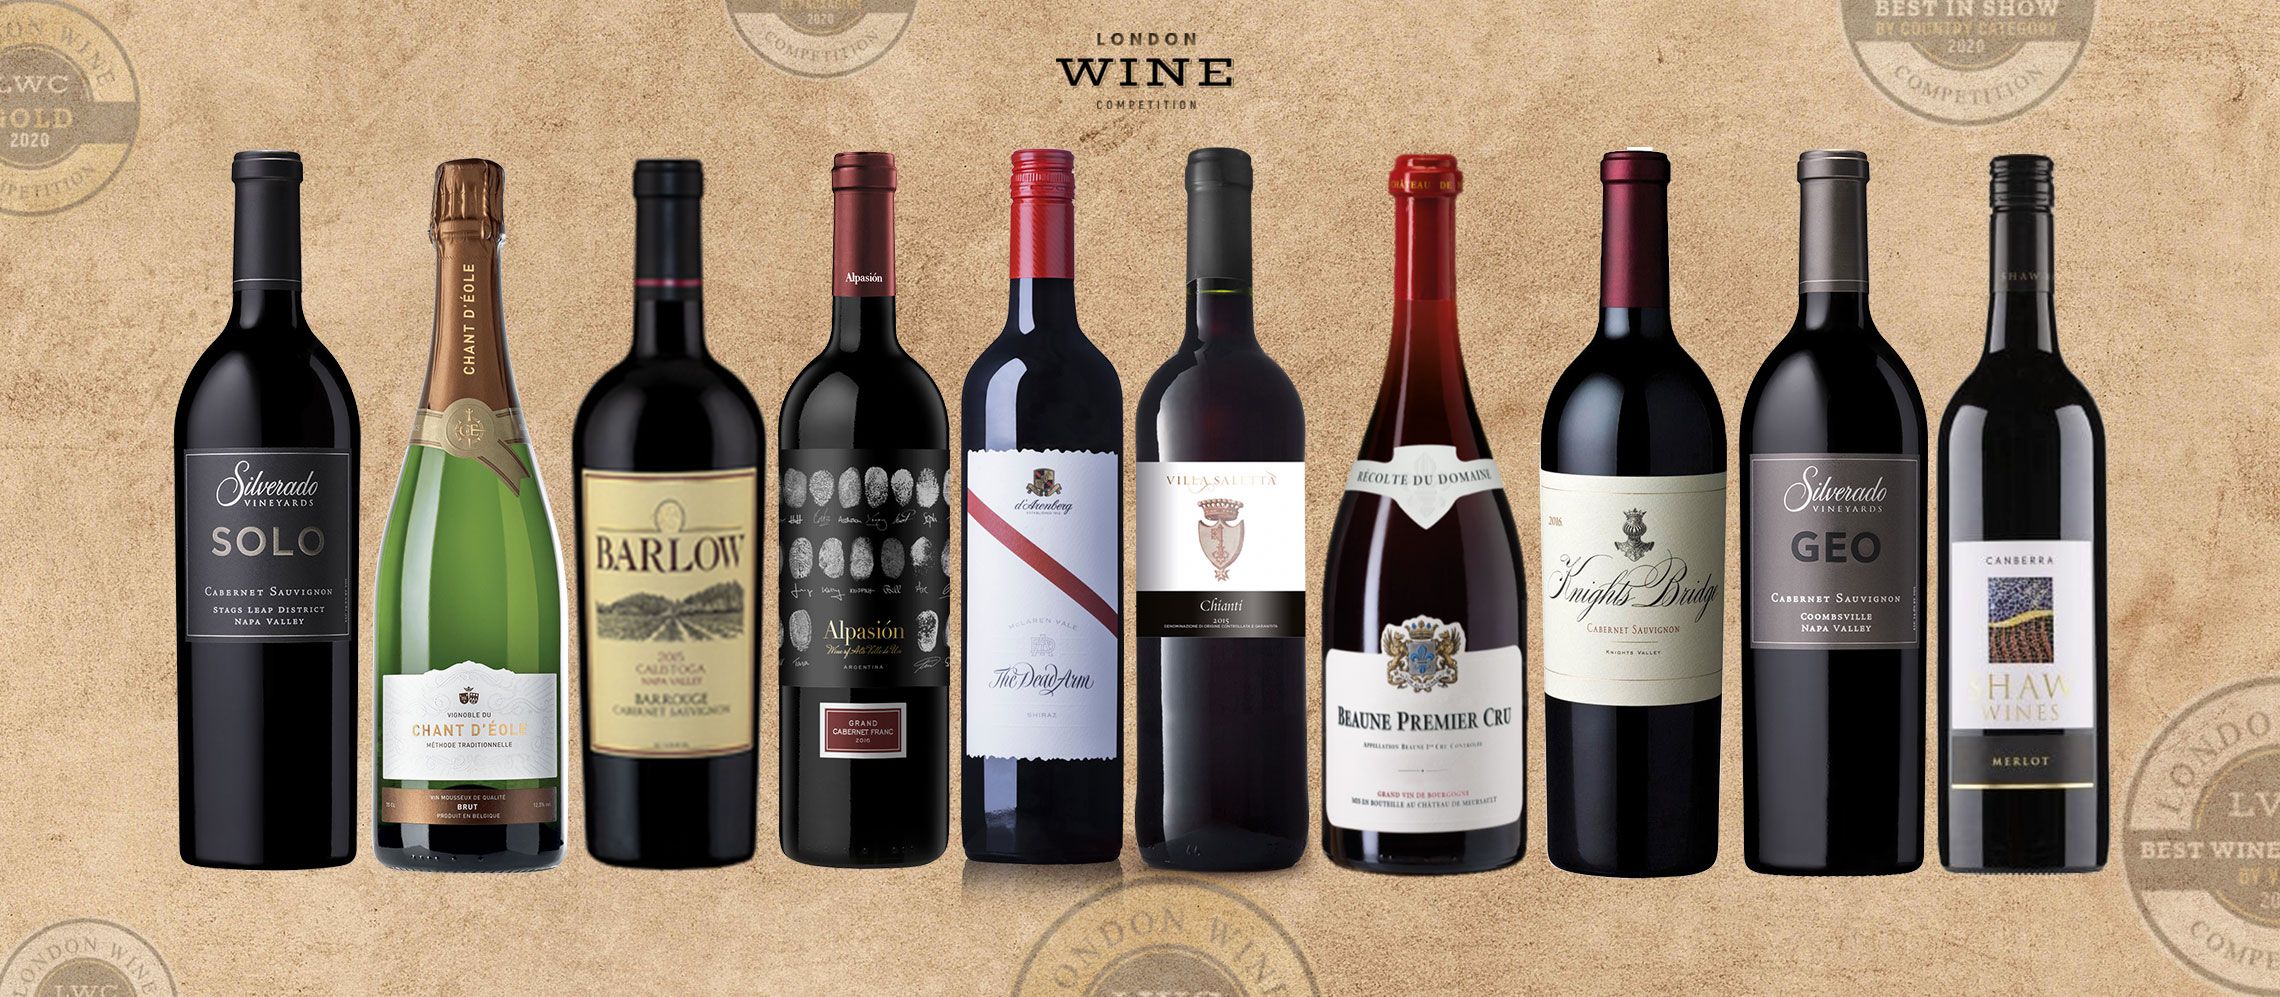 Photo for: Top 10 Gold Winners At The 2020 London Wine Competition